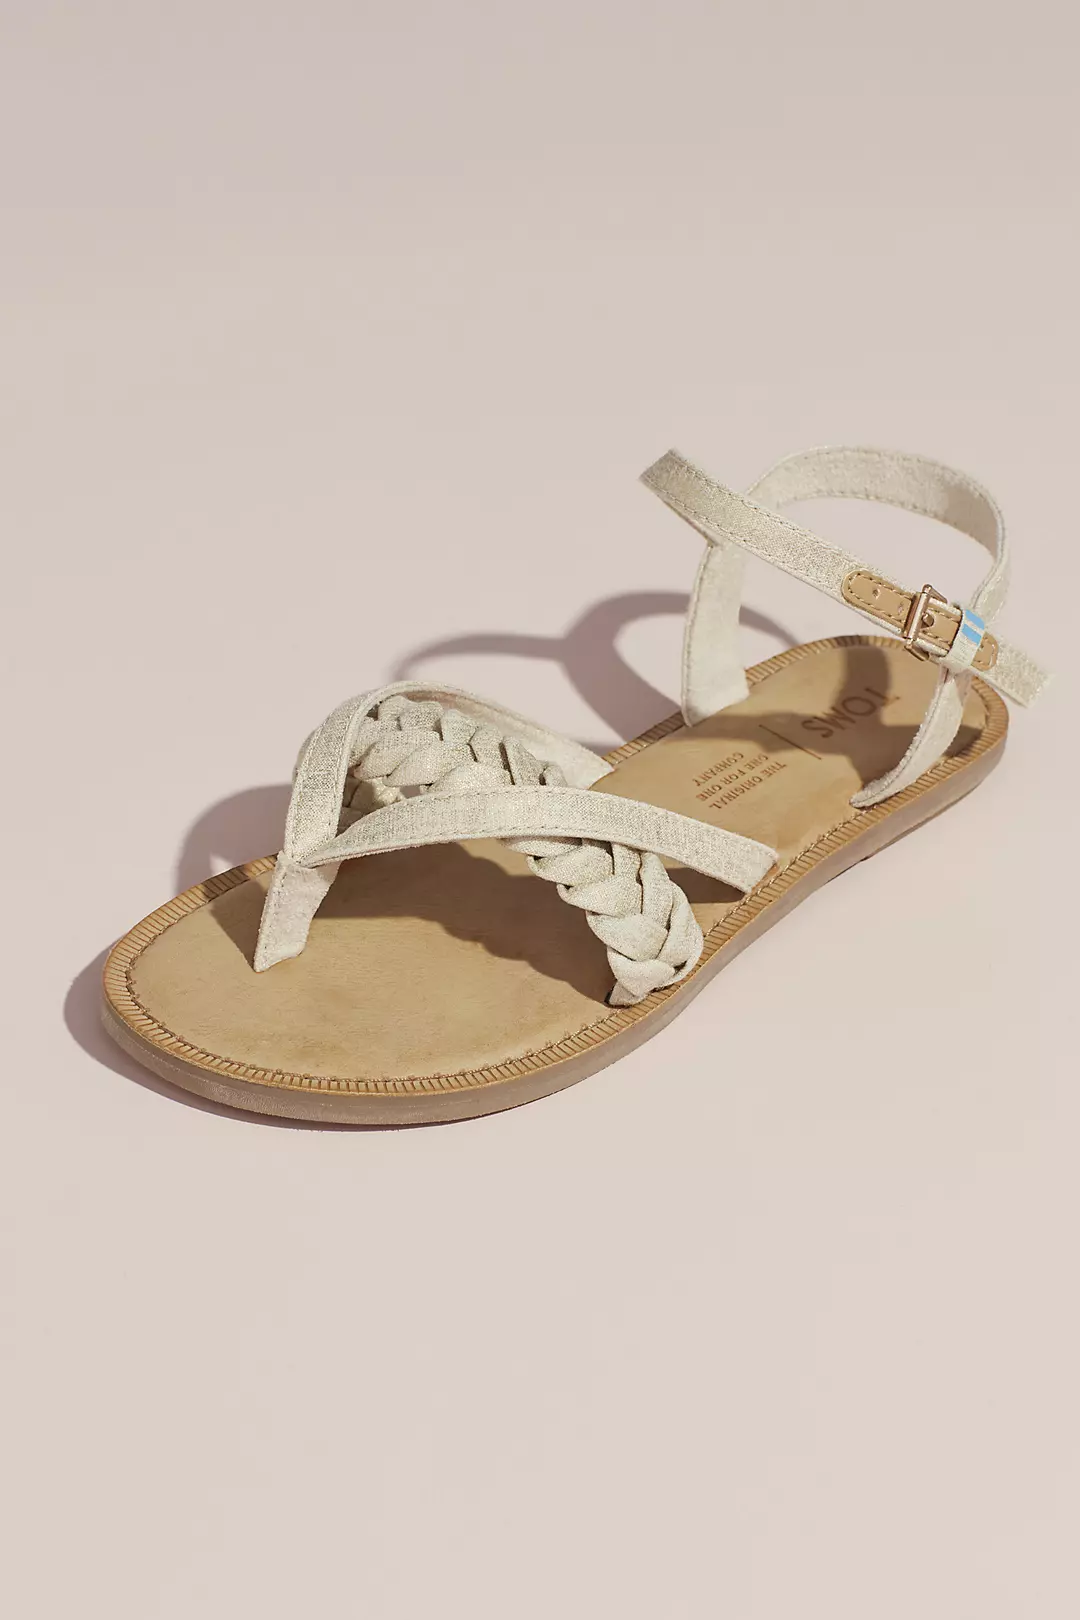 TOMS Braided Metallic Strappy Flat Sandals Image